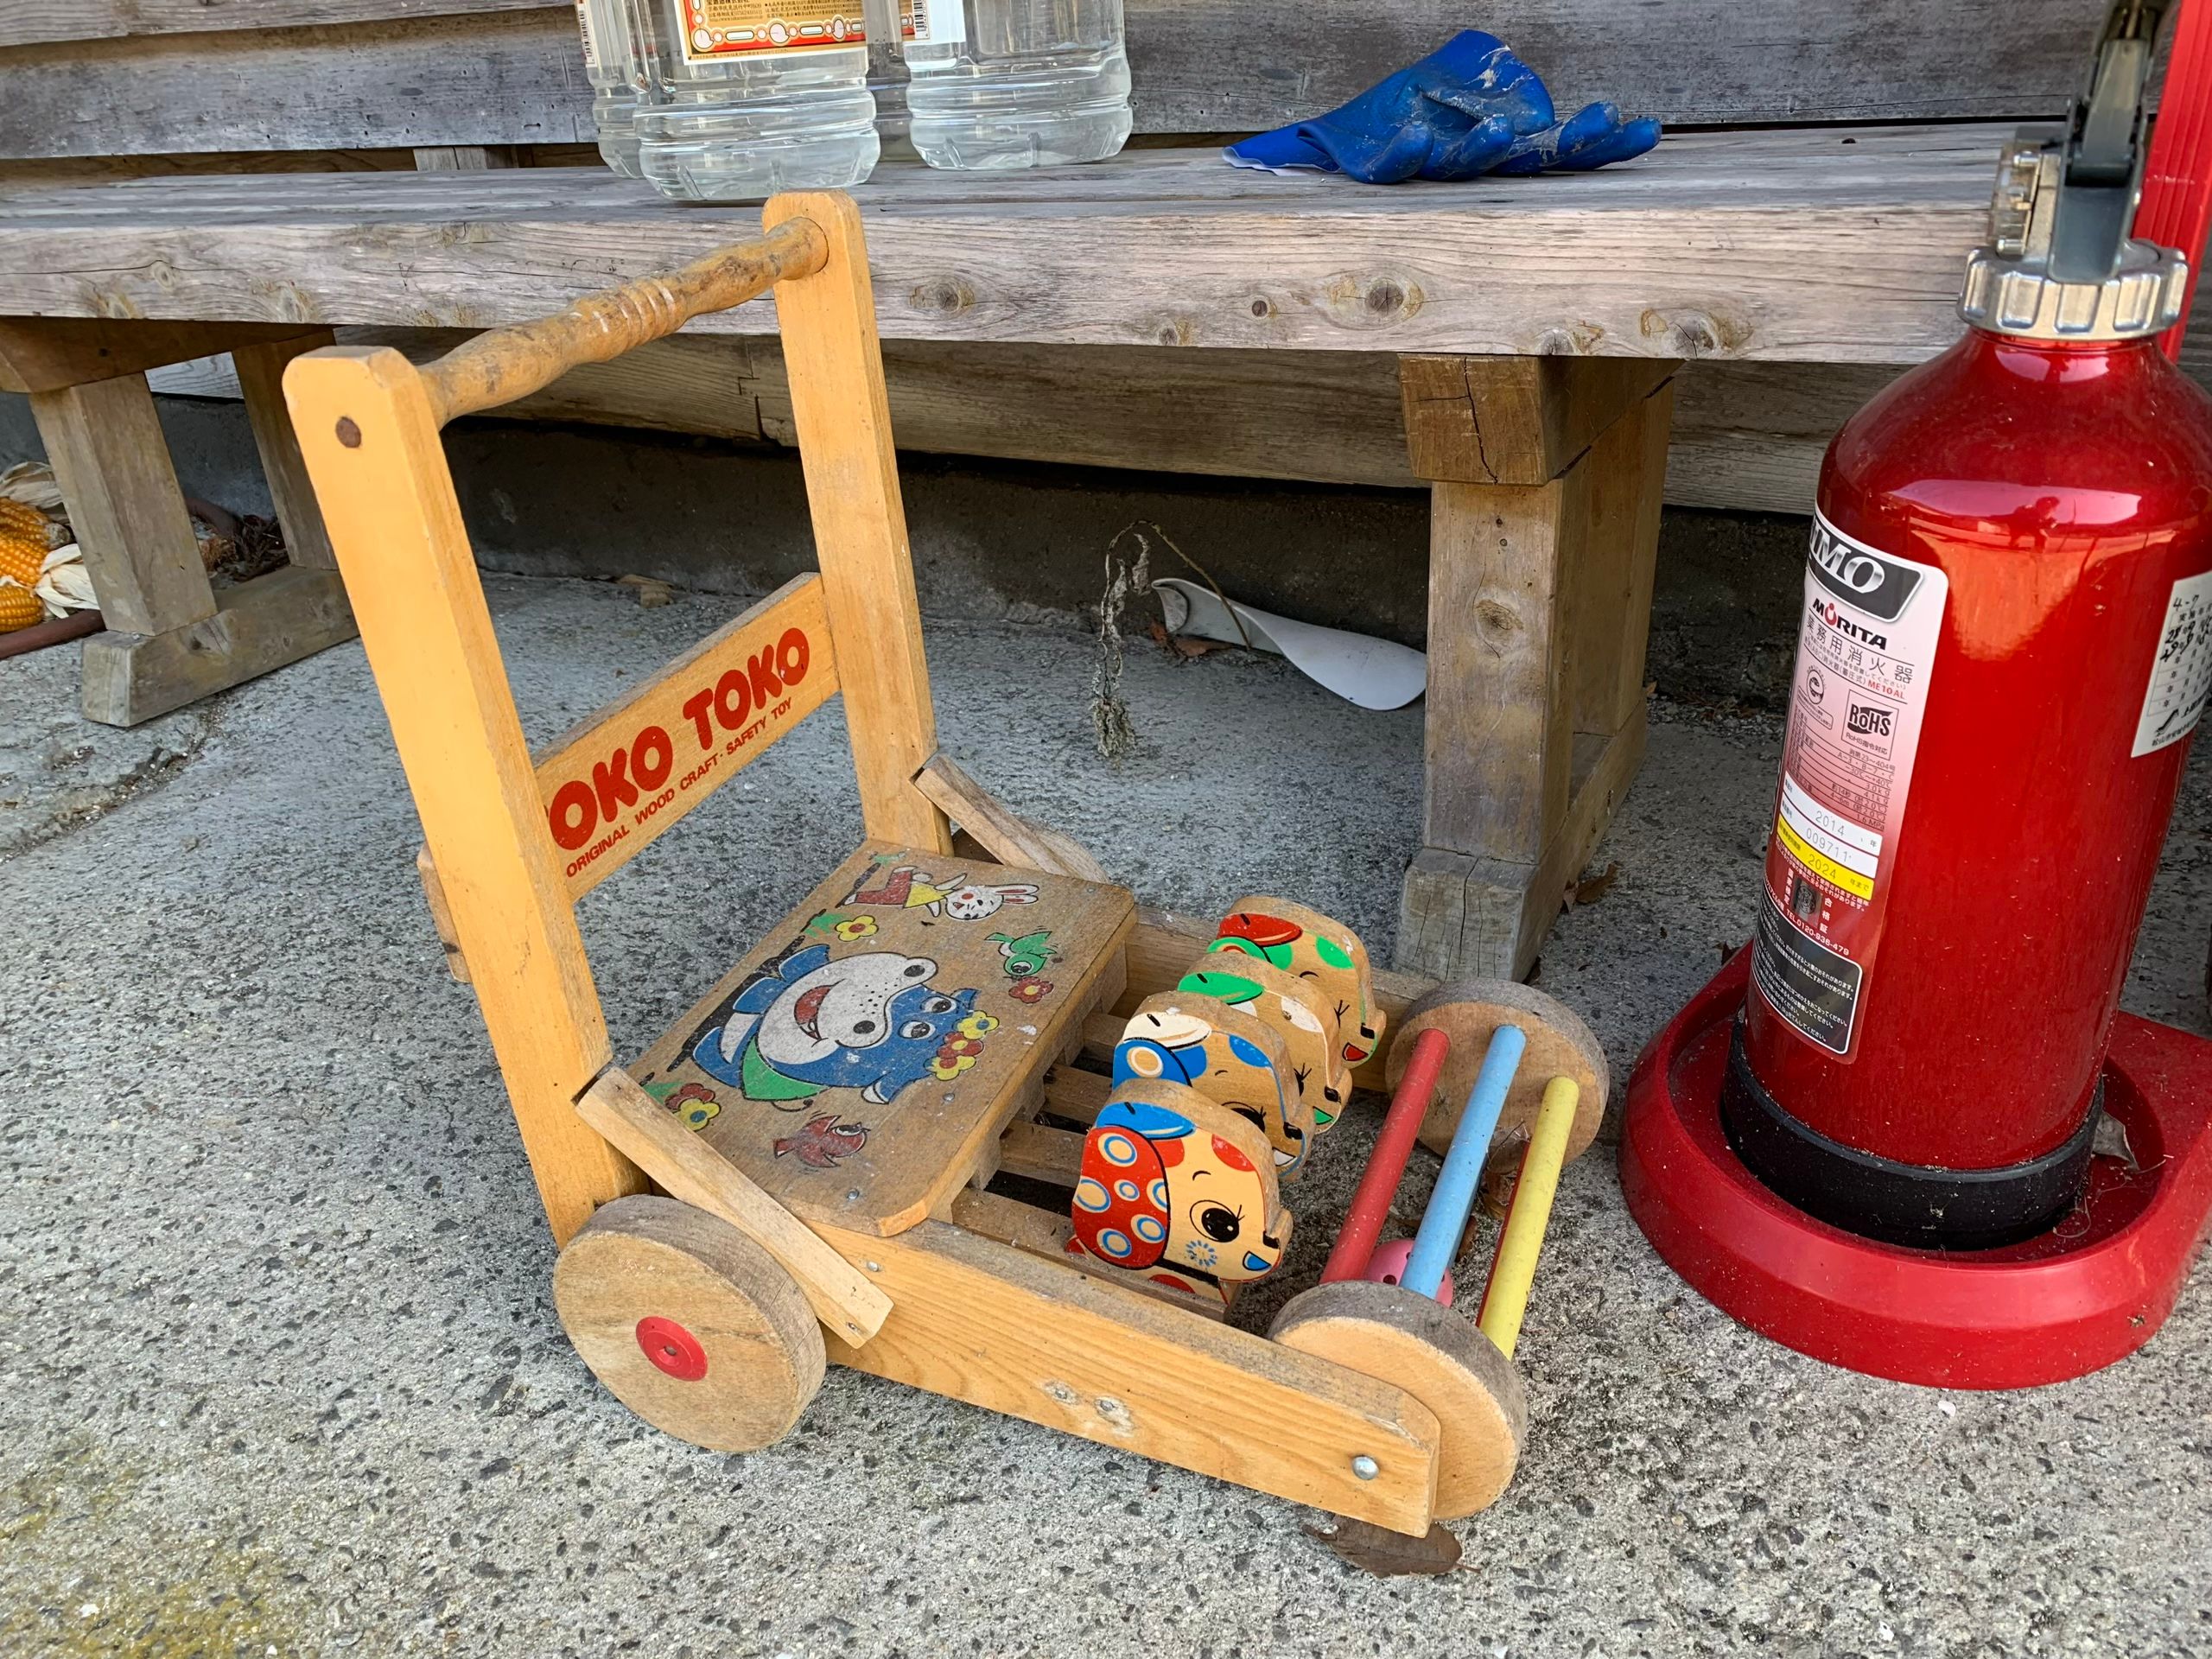 A child’s wooden toy placed next to a red fire extinguisher.